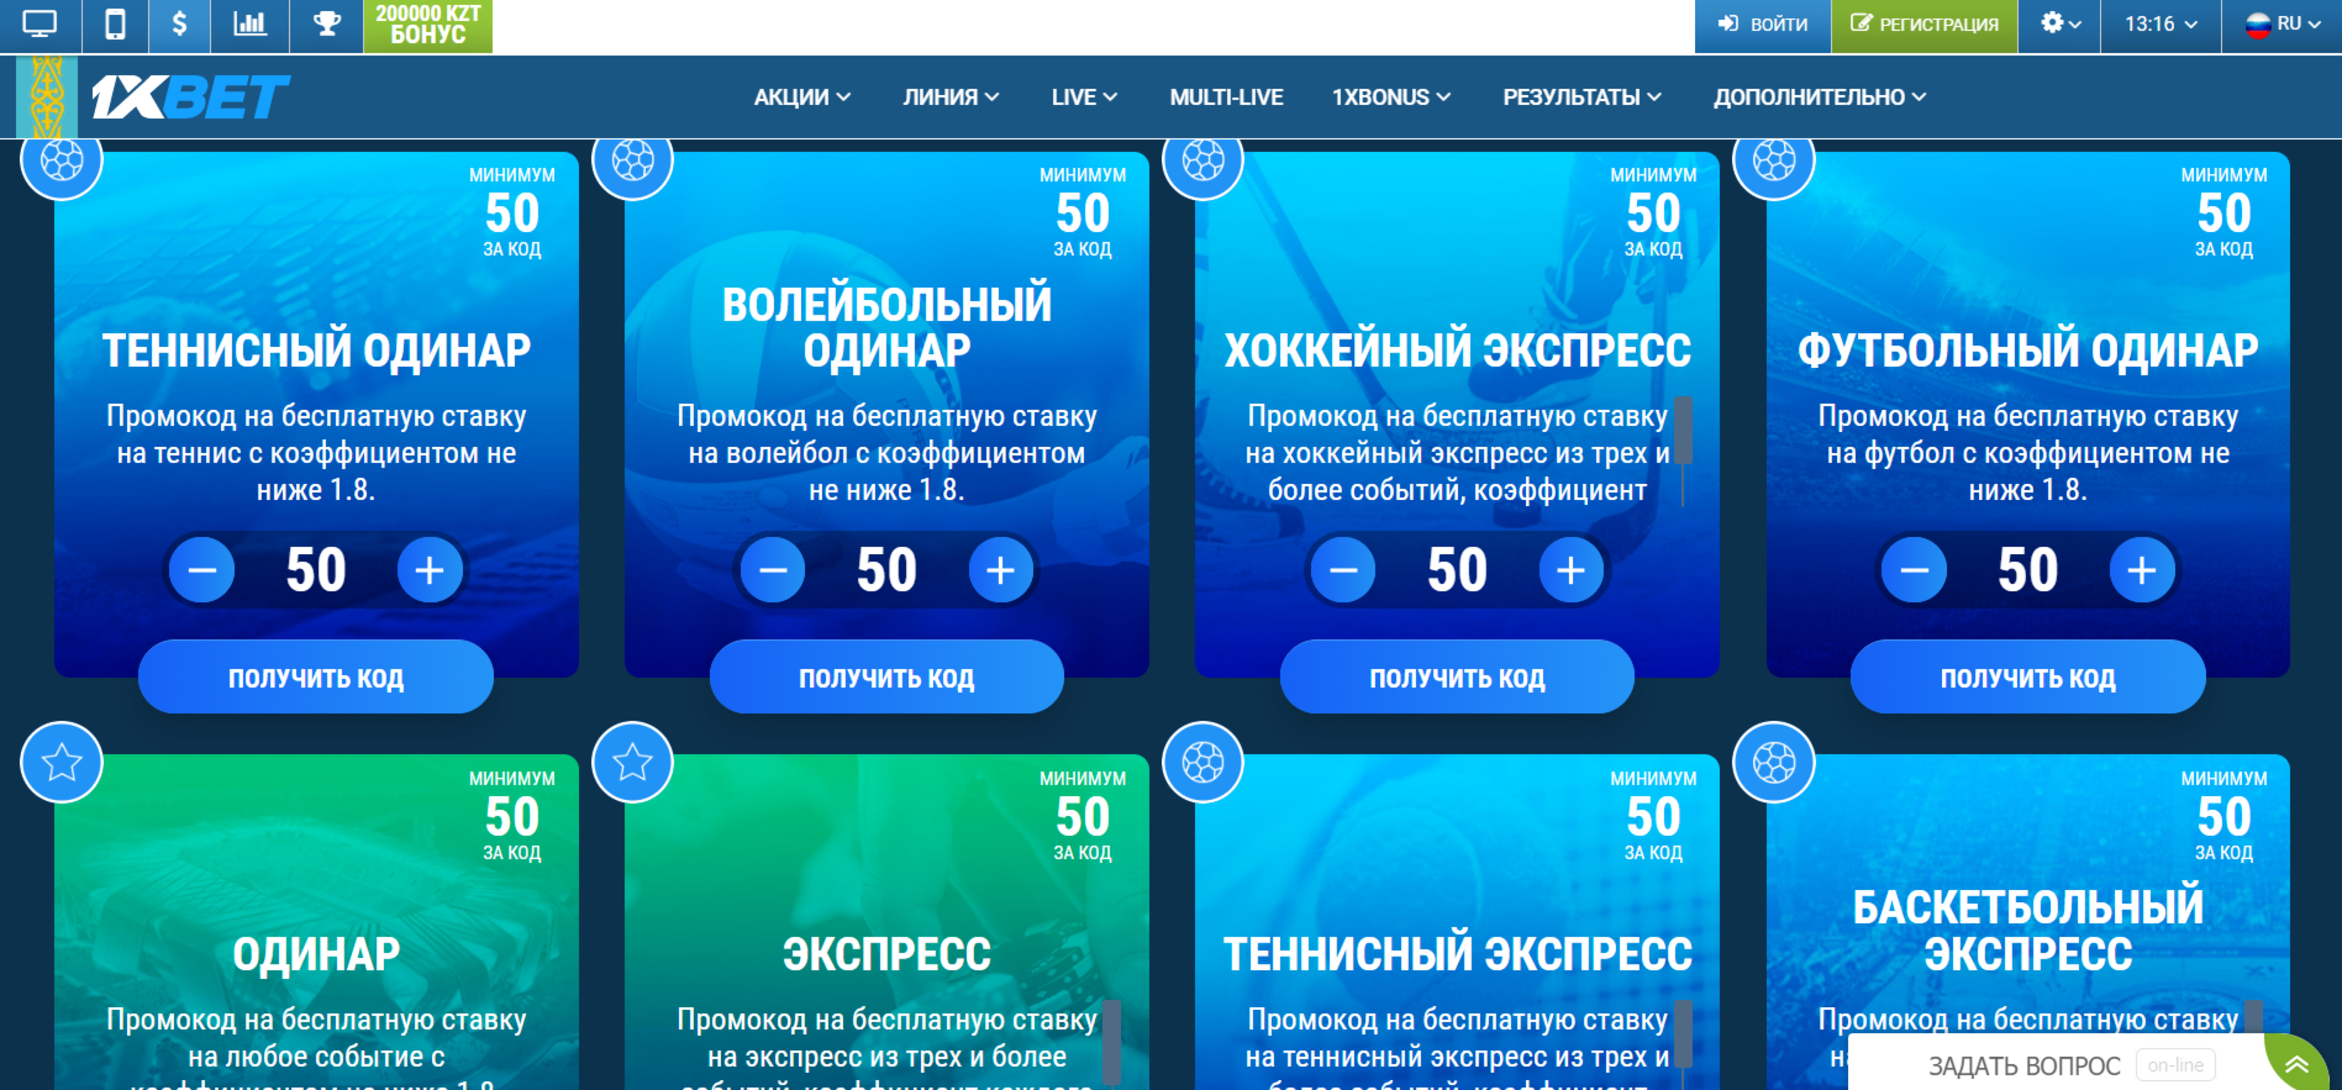 The World's Best промокод 1xbet You Can Actually Buy